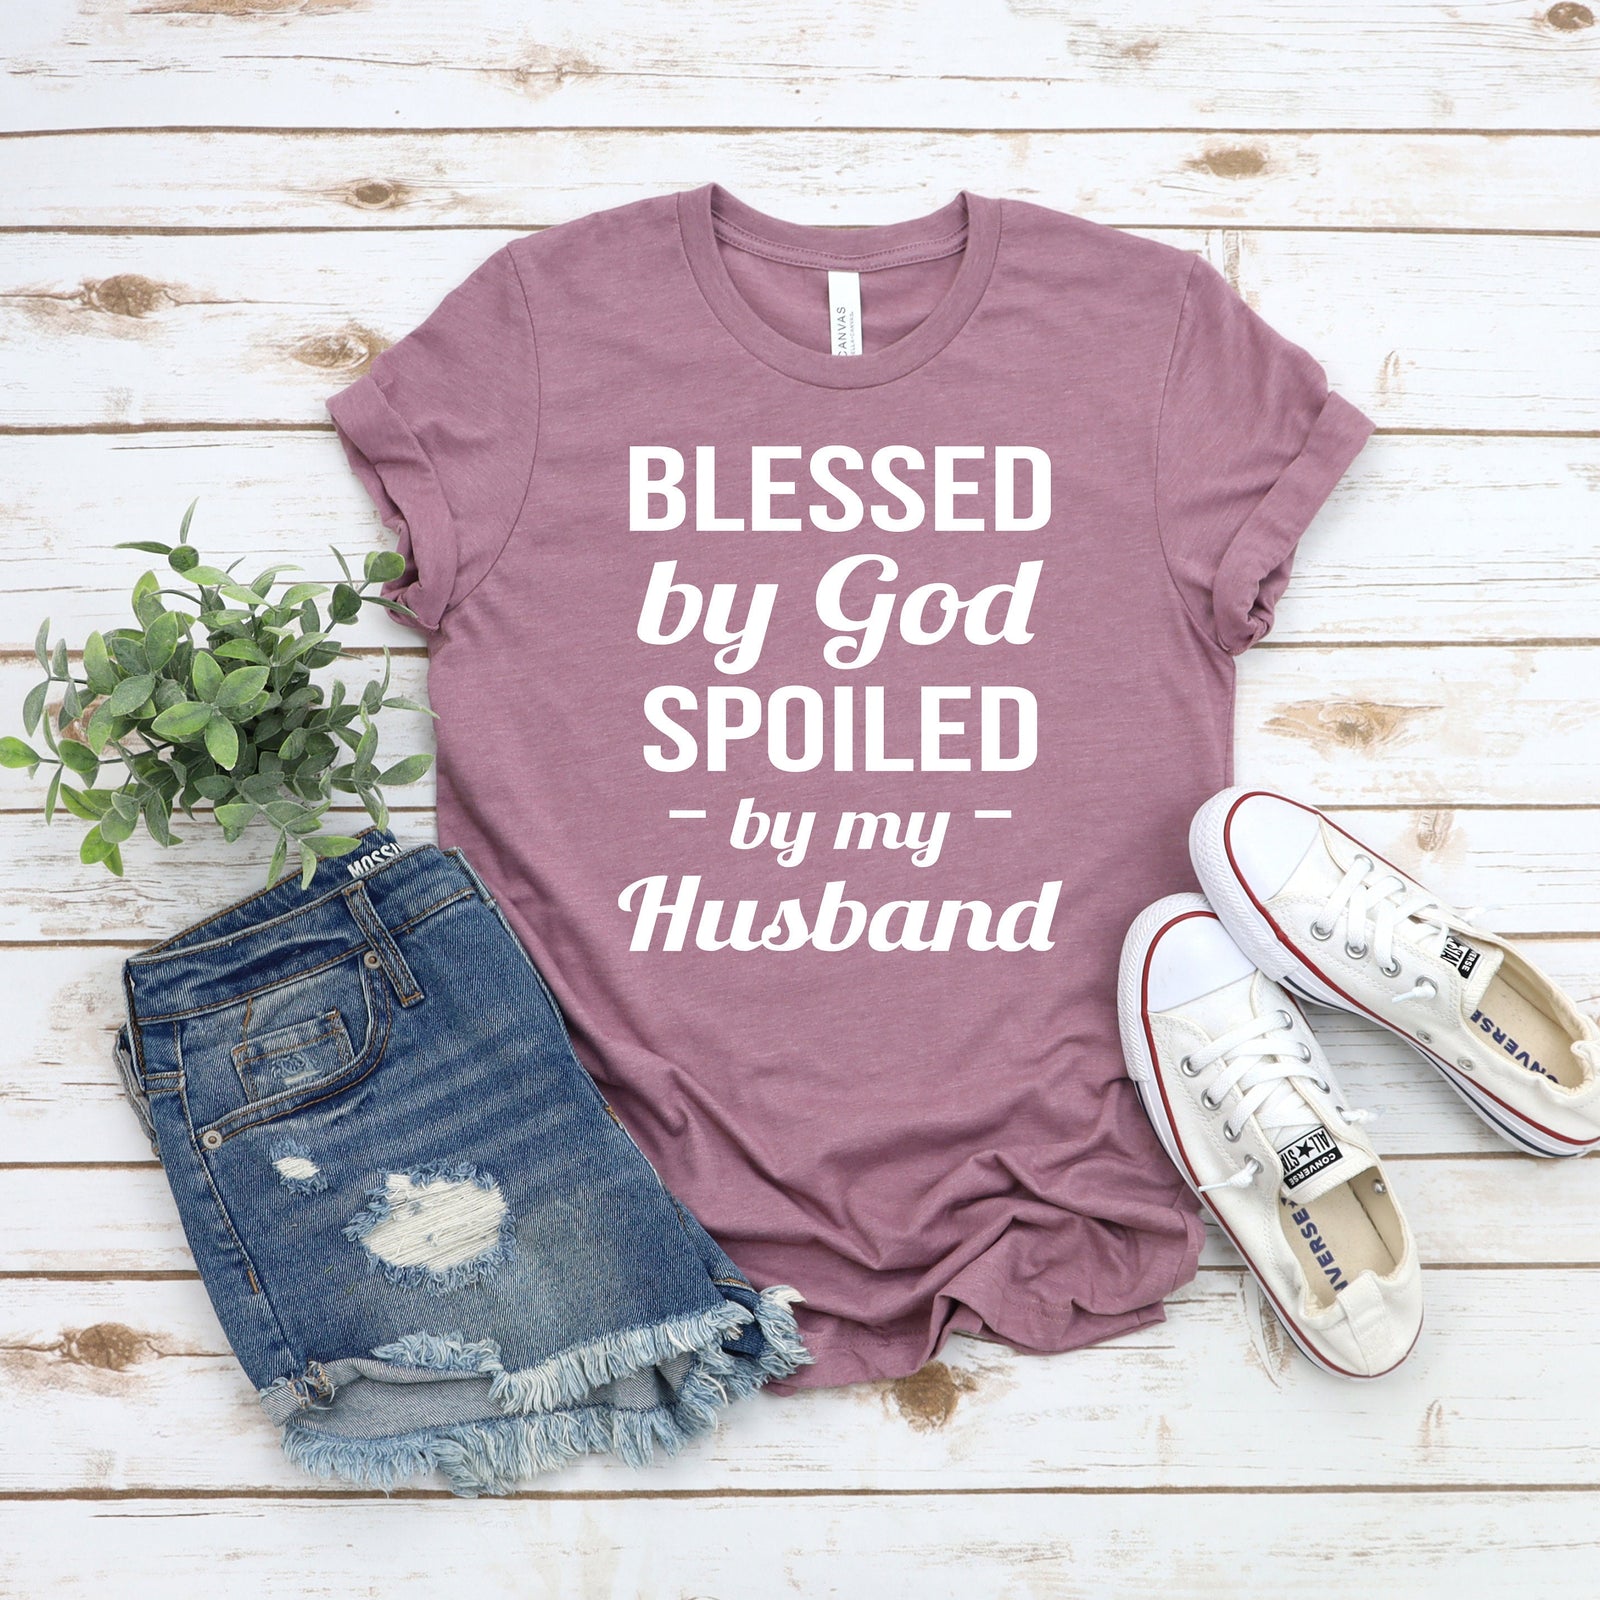 Blessed by God Spoiled by my Husband T Shirt - Grateful Wife Shirt - Wife Statement Shirt - Blessed Wife Shirt - Spoiled Wife Shirt